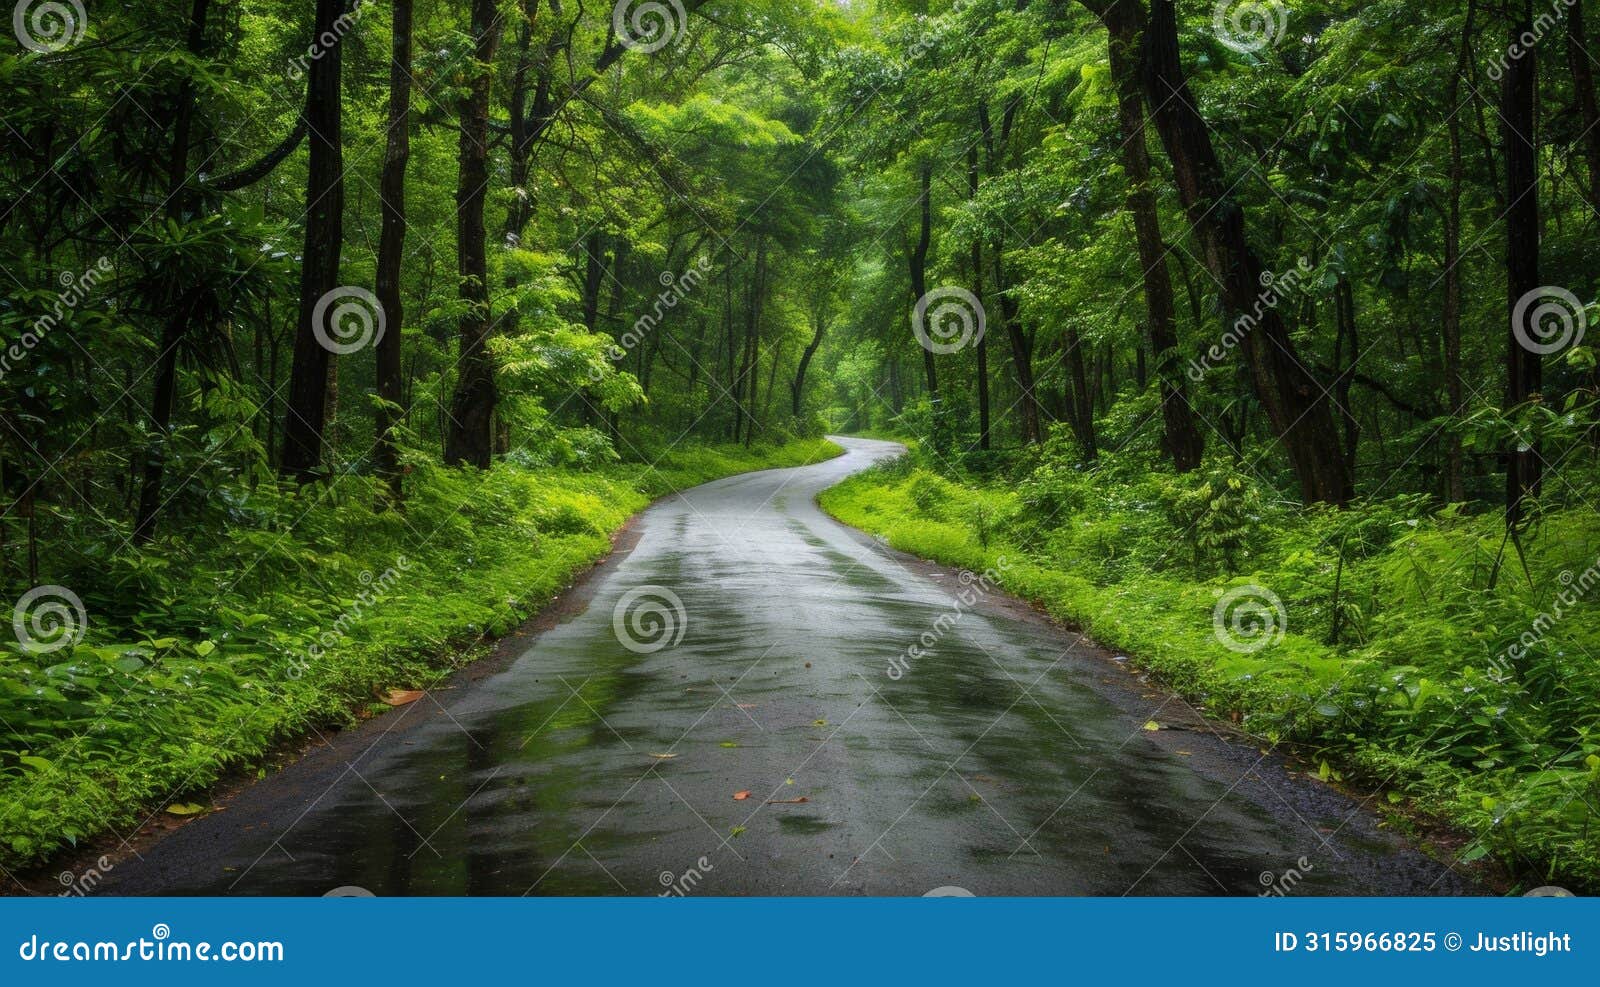 a narrow road meandering through a lush glossy forest its surface glistening from the recent rainfall. . ai generation